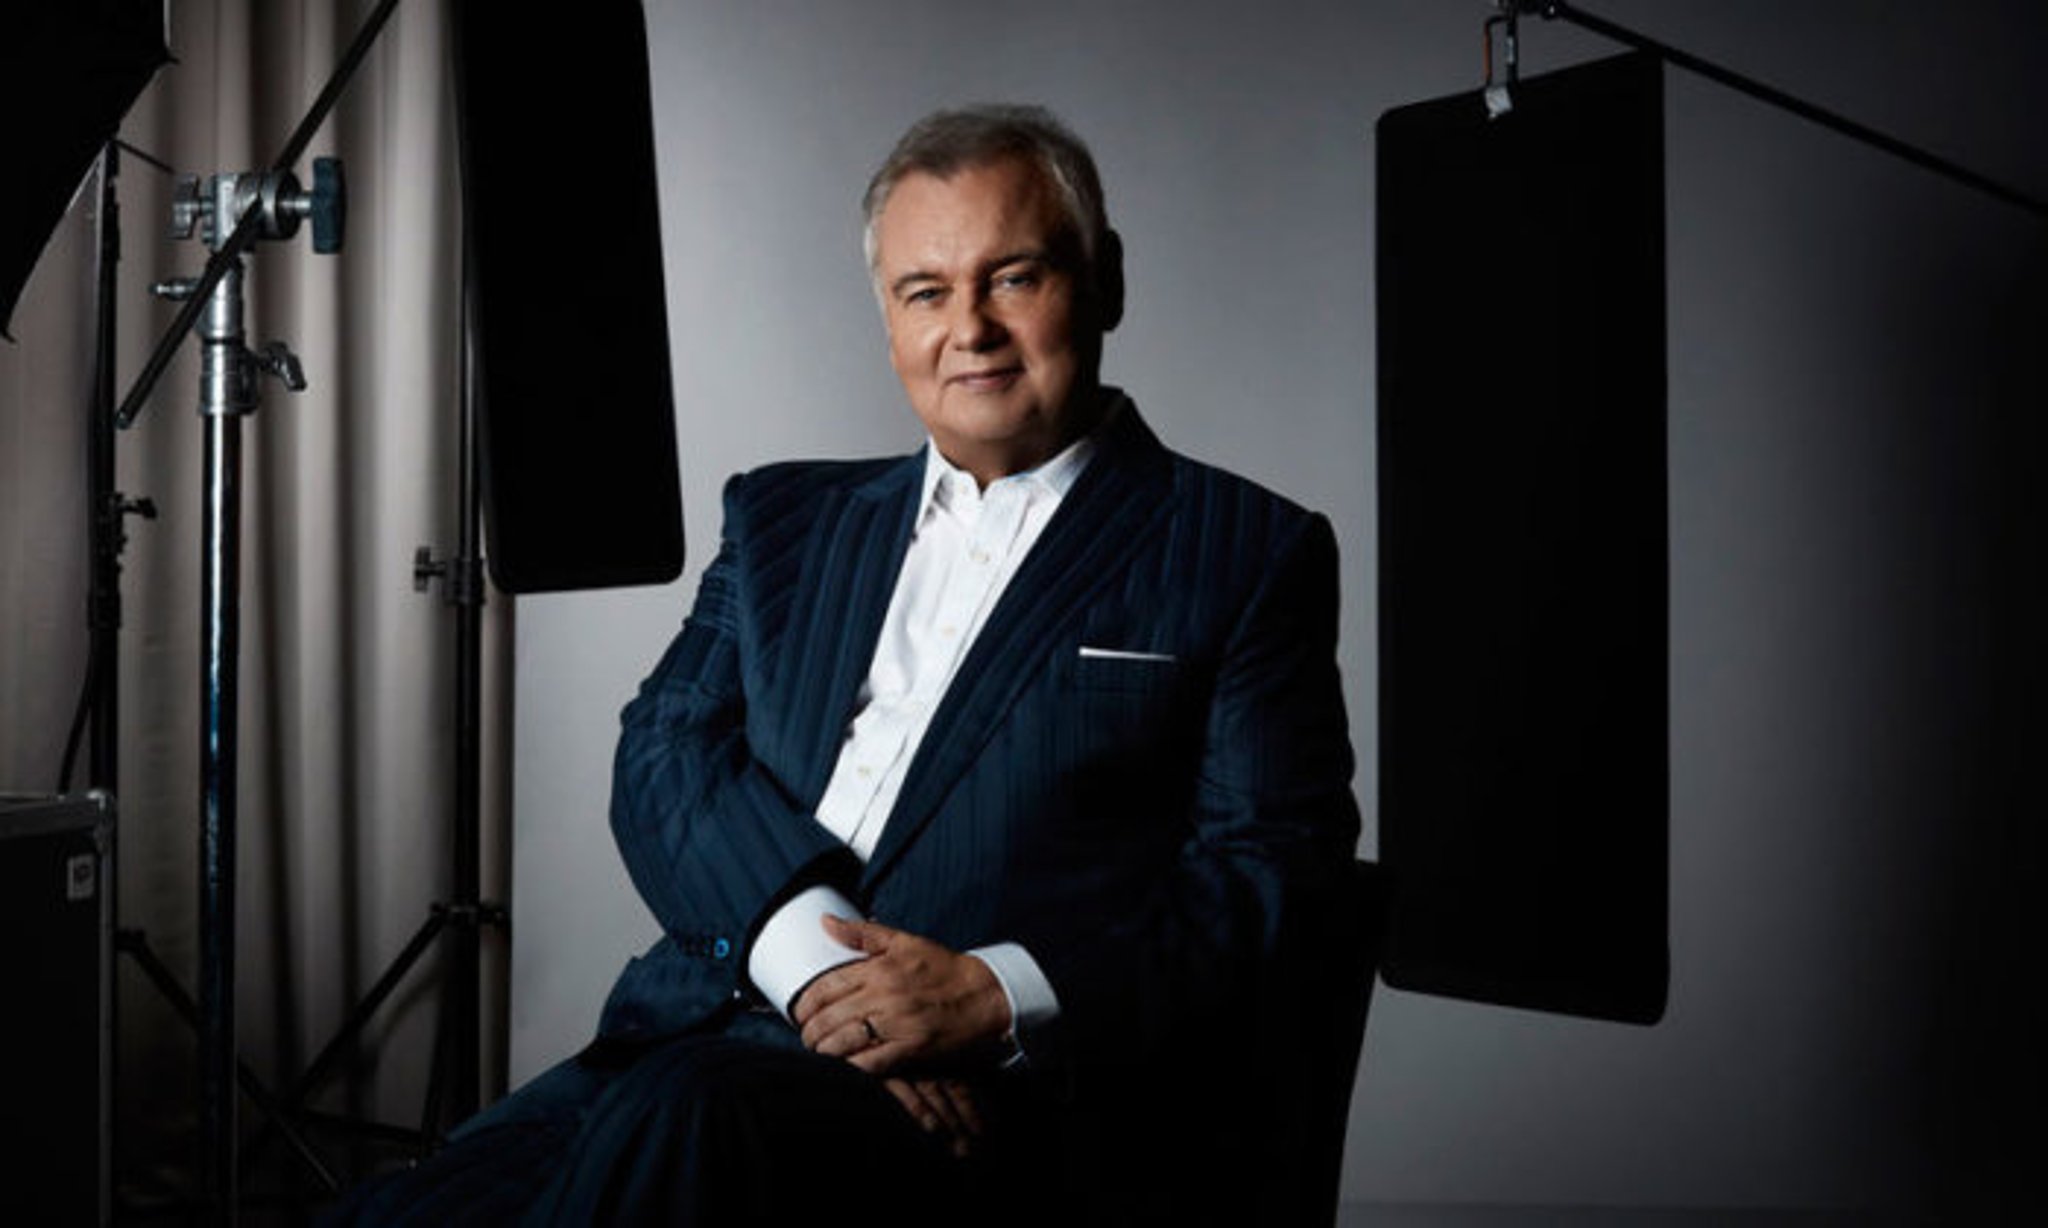 Eamonn Holmes to host inaugural Child of Britain Awards this summer